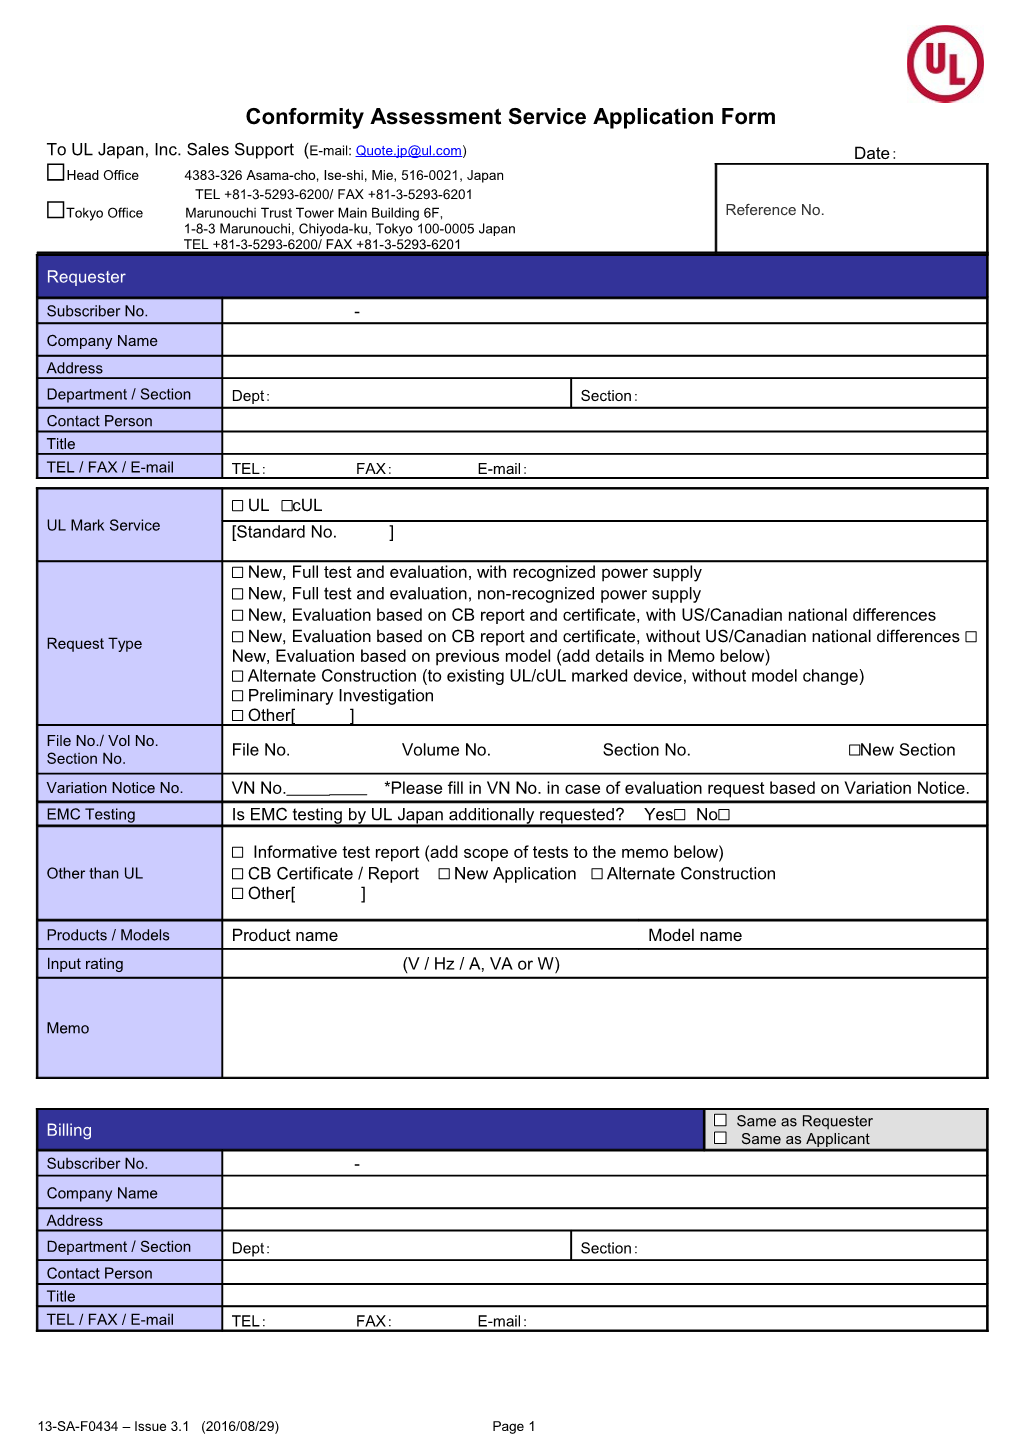 Conformity Assessment Service Application Form